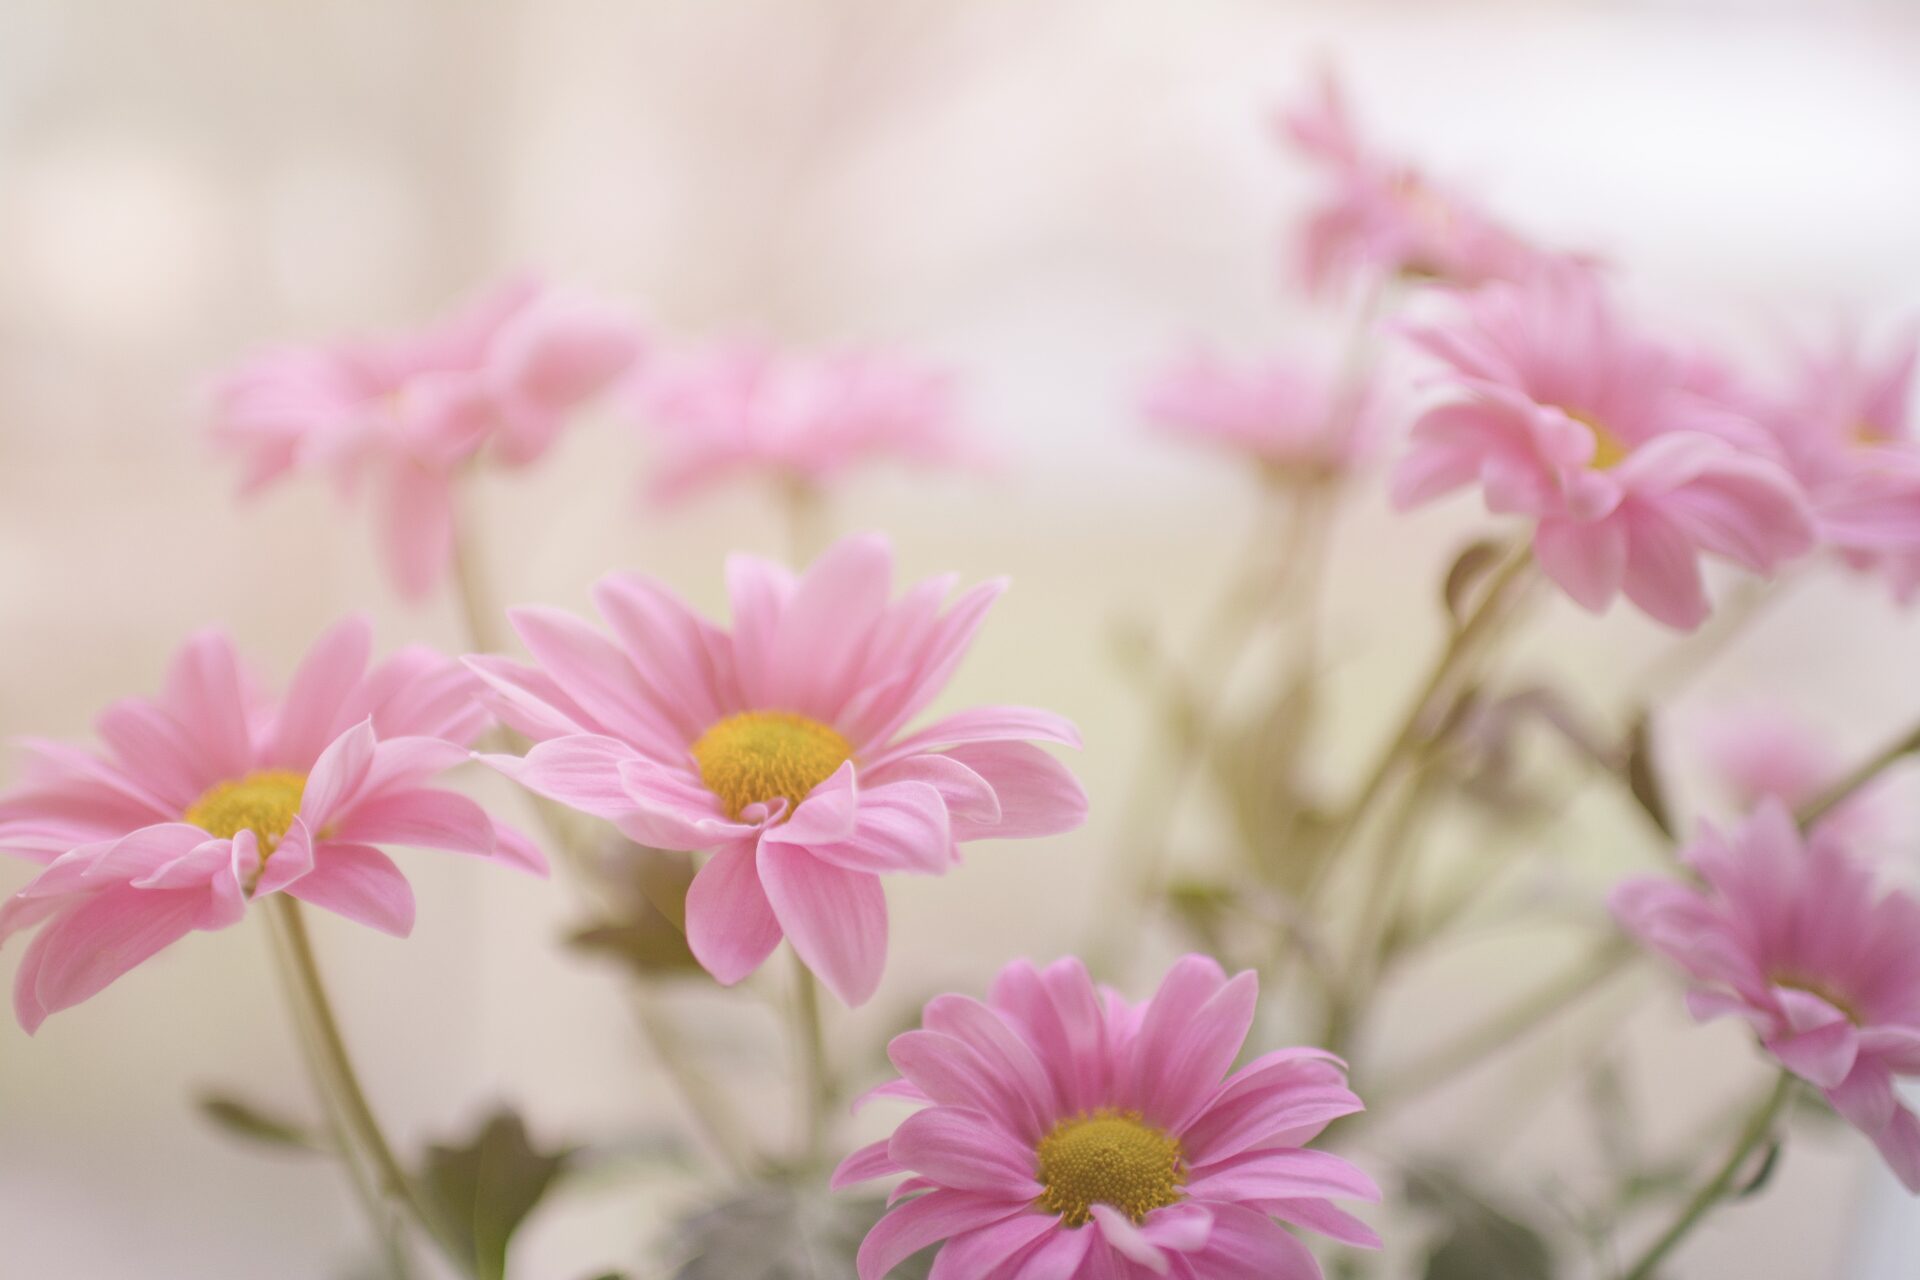 A close up of pink flowers with yellow centers